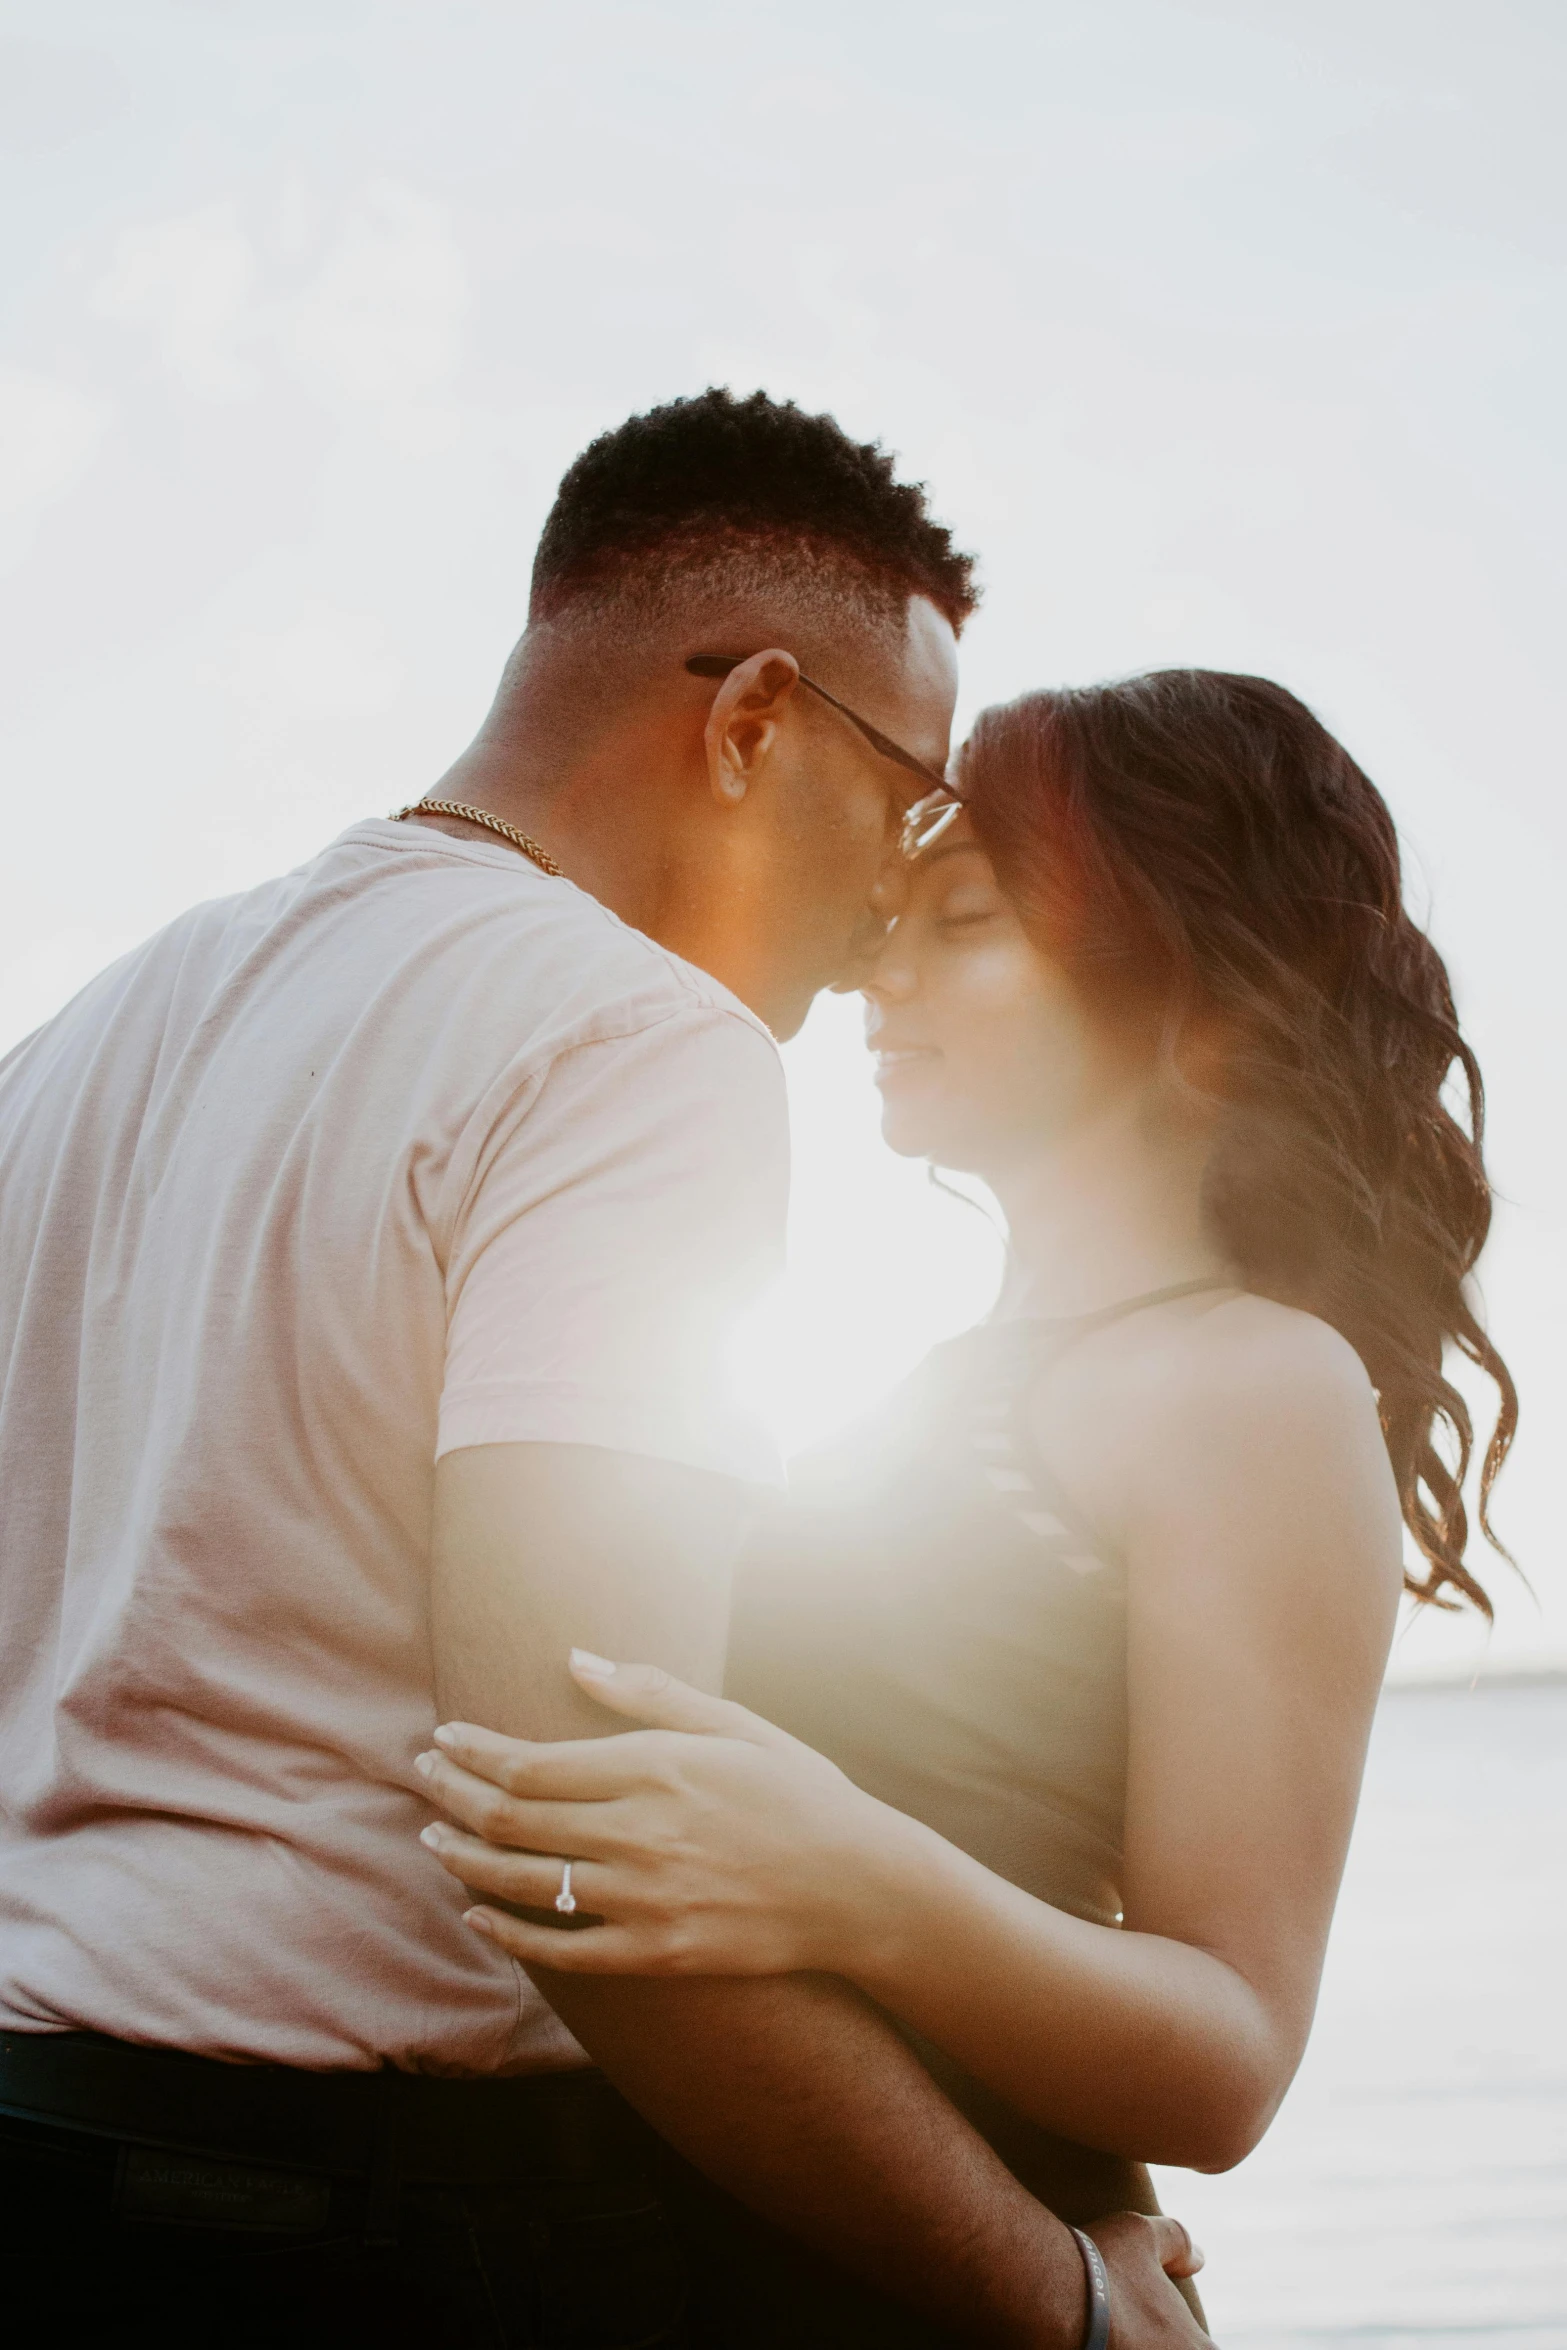 a man and woman standing next to each other on a beach, a photo, pexels contest winner, romanticism, making out, sunny lighting, hispanic, high-key